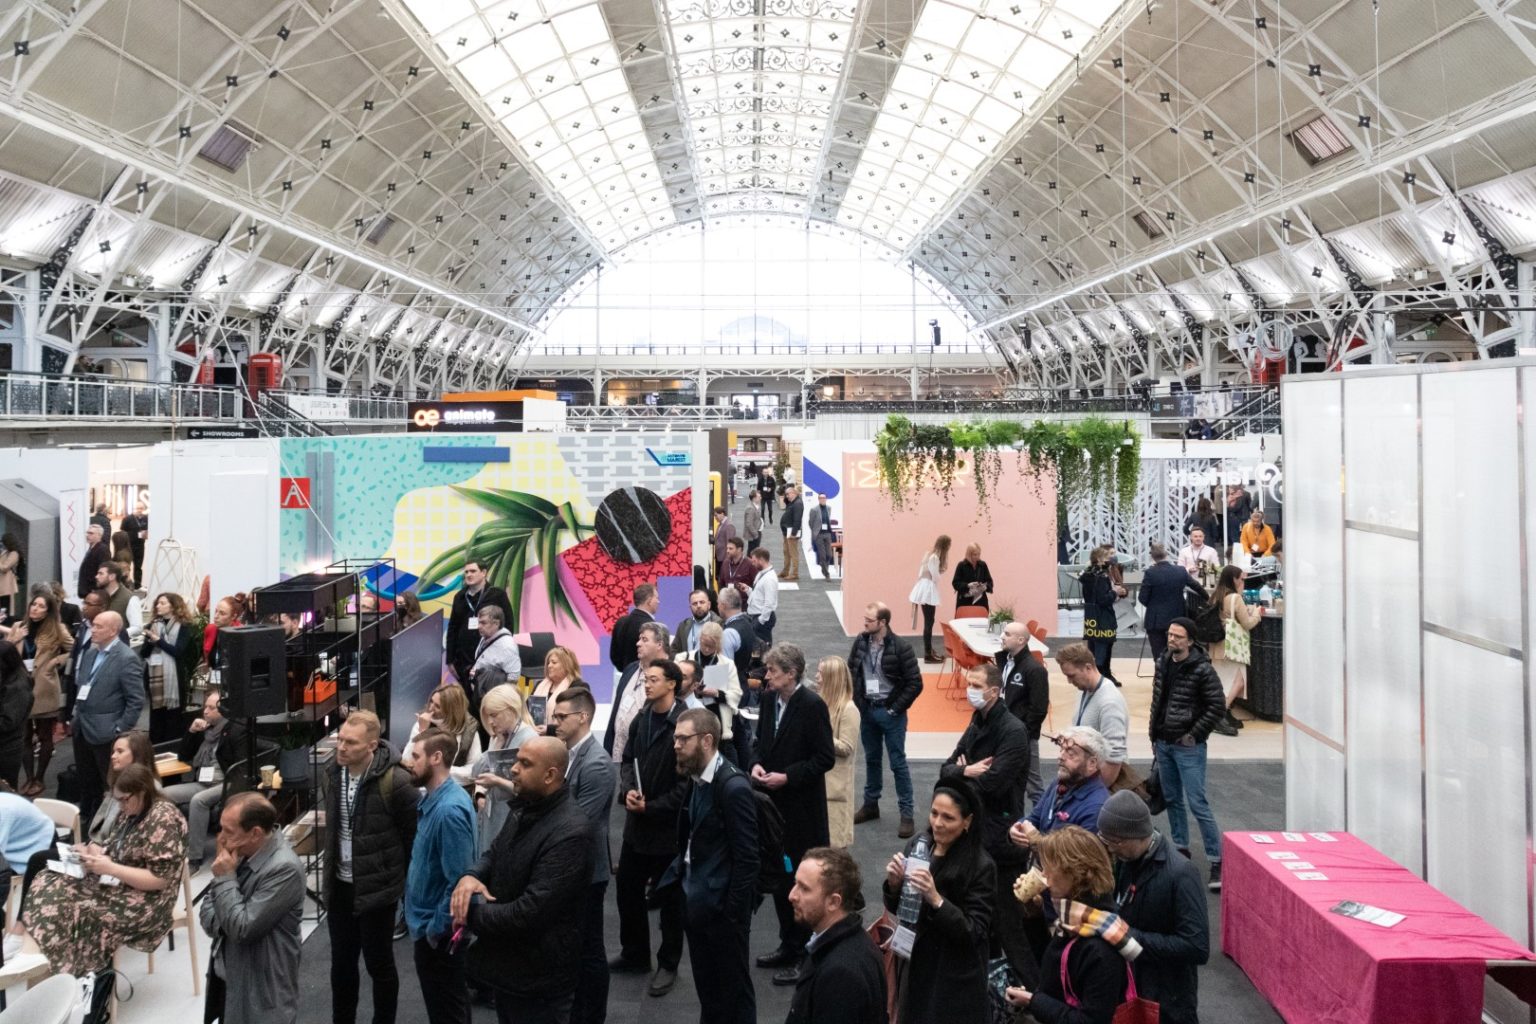 Workspace Design Show Being Held At The London Business Design Centre 1536x1024 